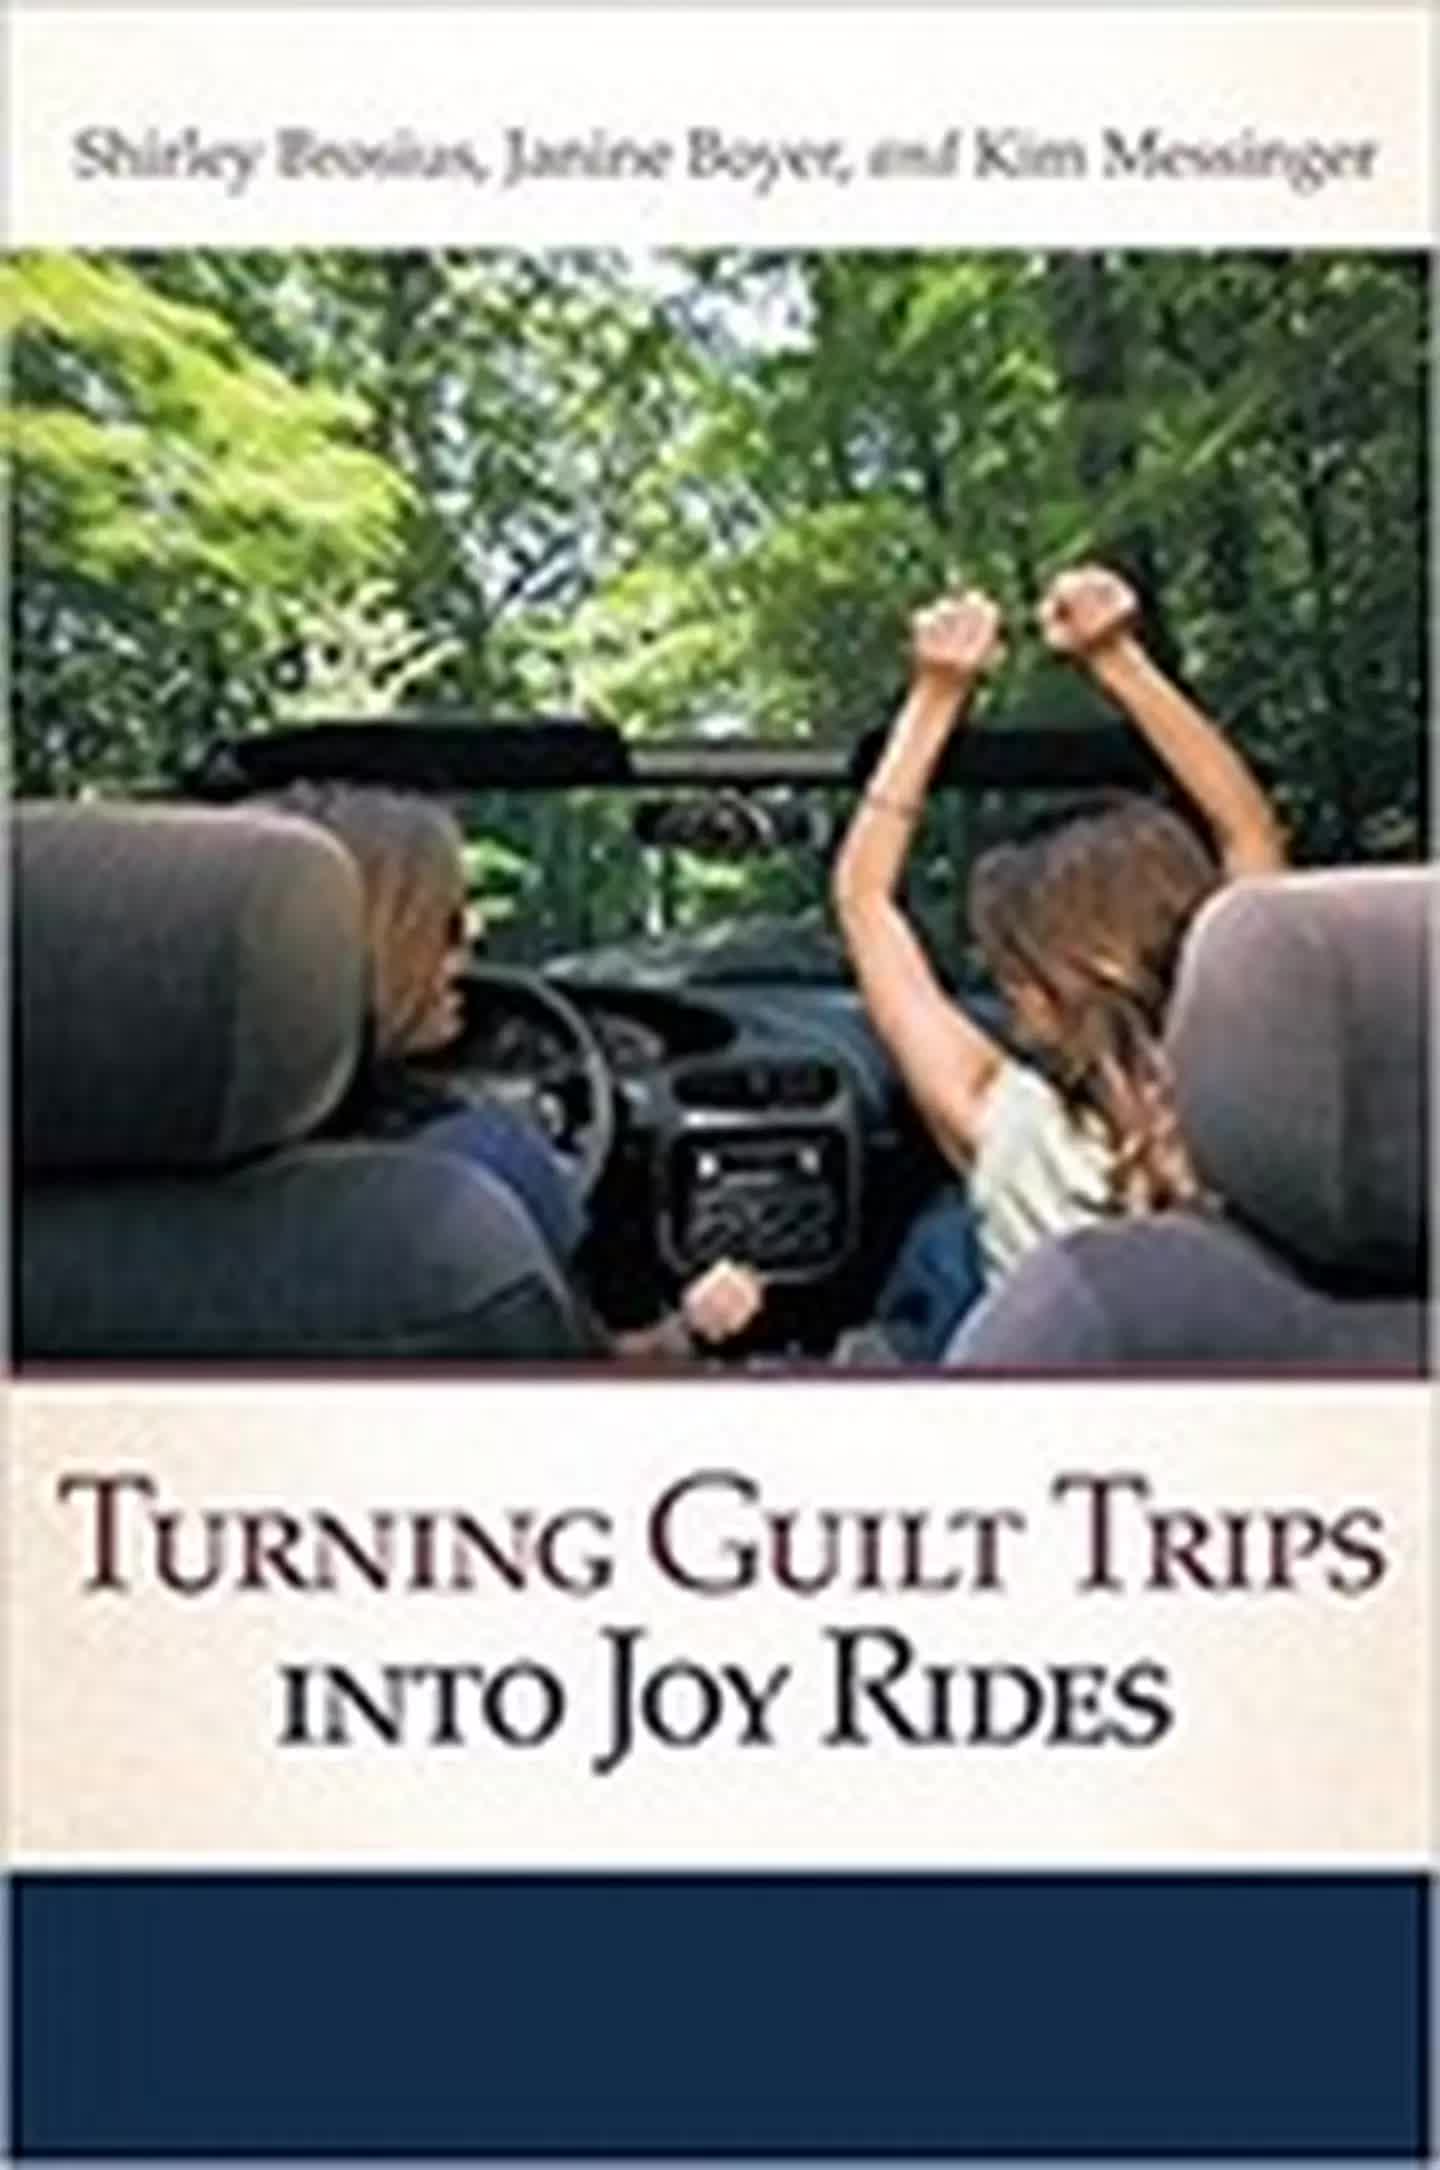 shirley brosius turning guilt trips into joy rides arise daily